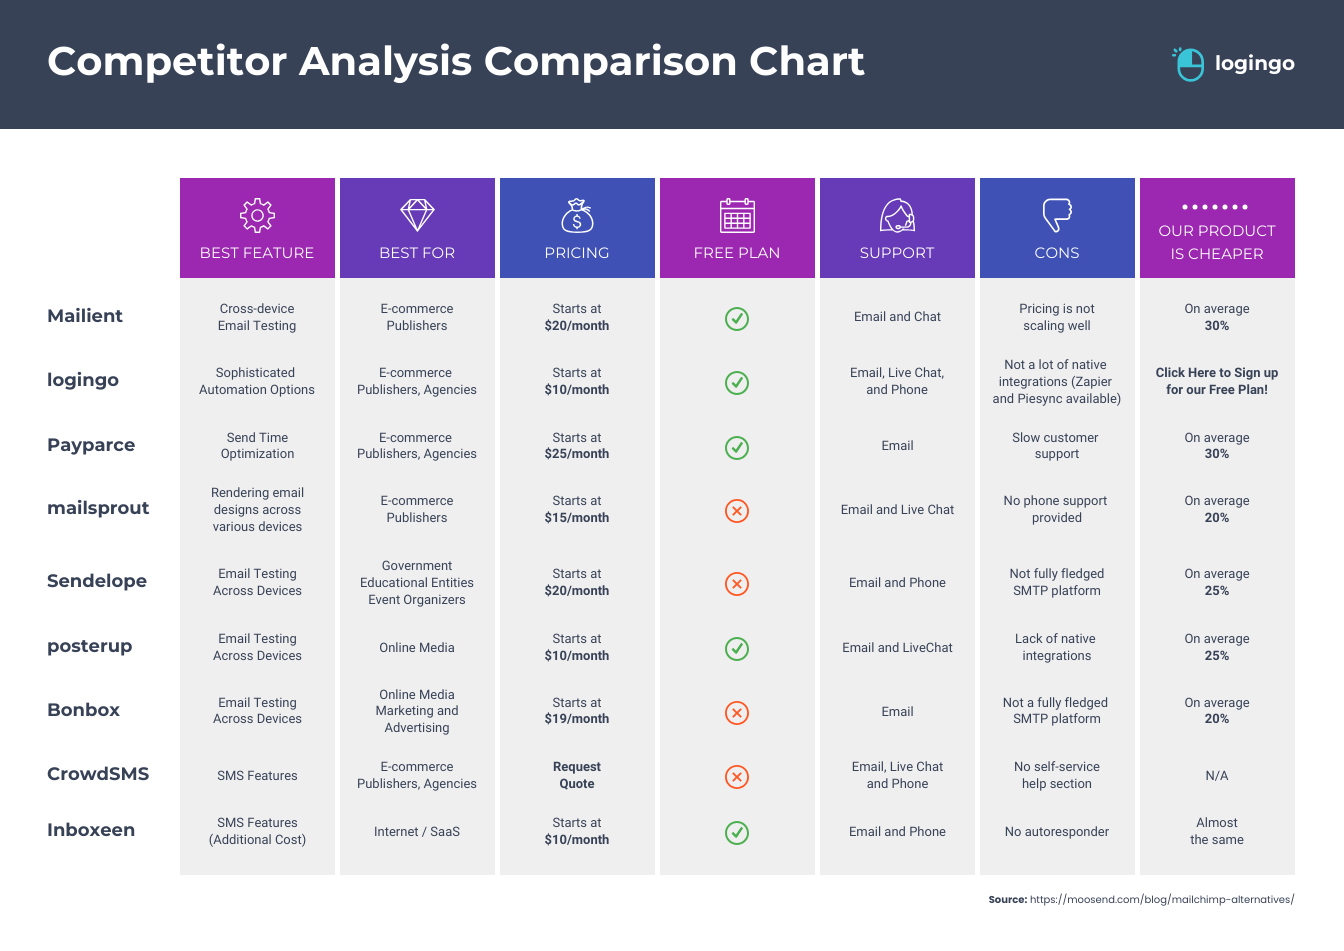 A chart that compares the features of different website analysis tools. The chart includes information on the best features, best for, pricing, free plan, support, and cons of each tool.